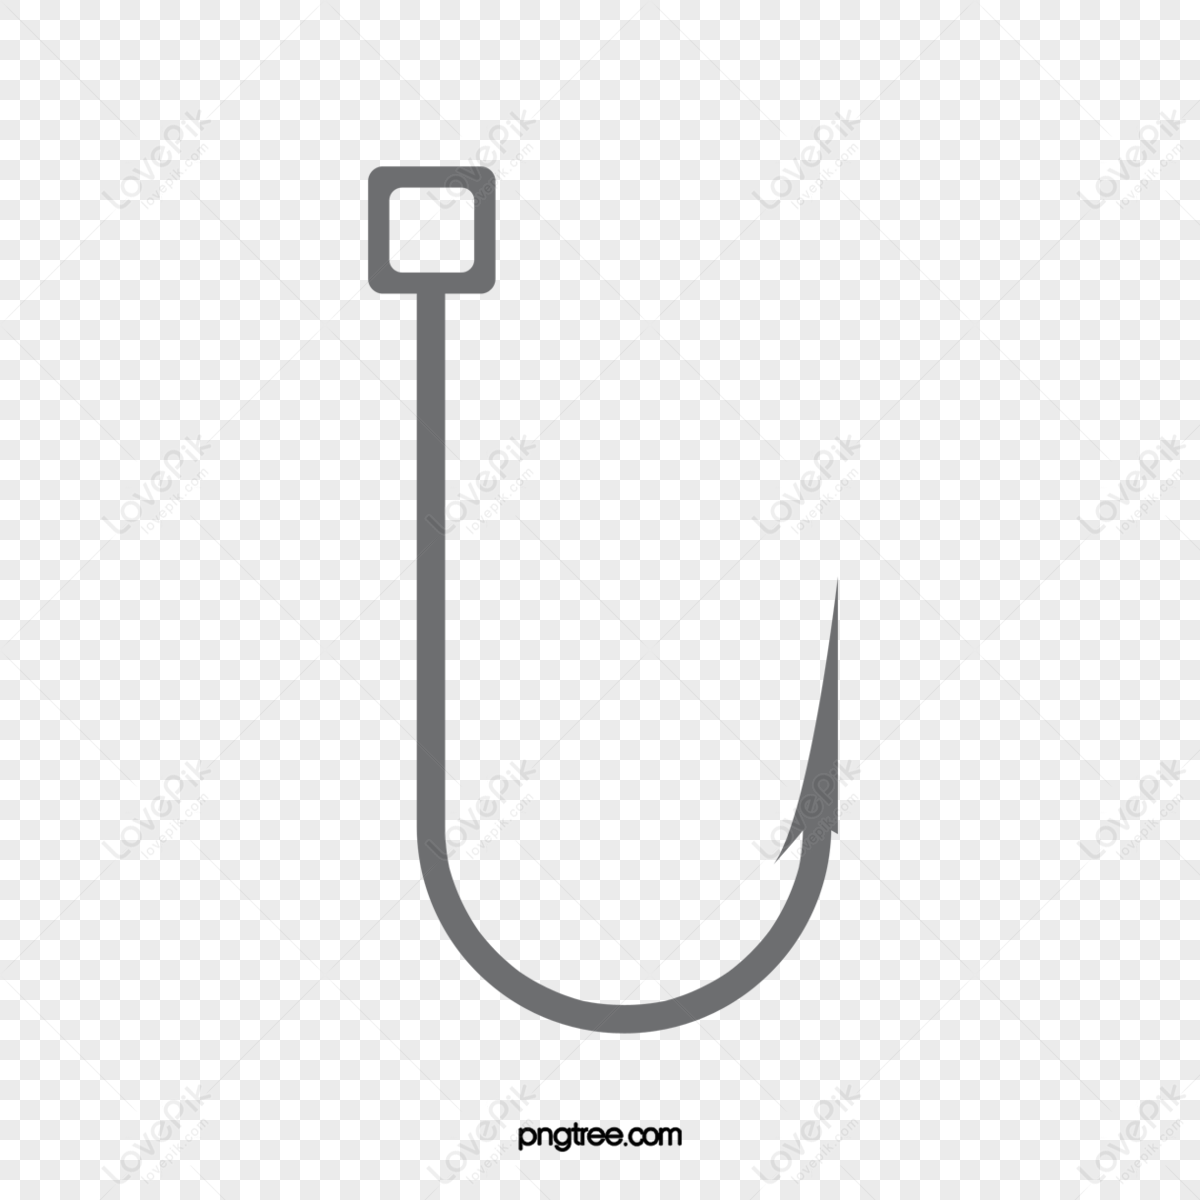 Fishing Hook PNG Images With Transparent Background